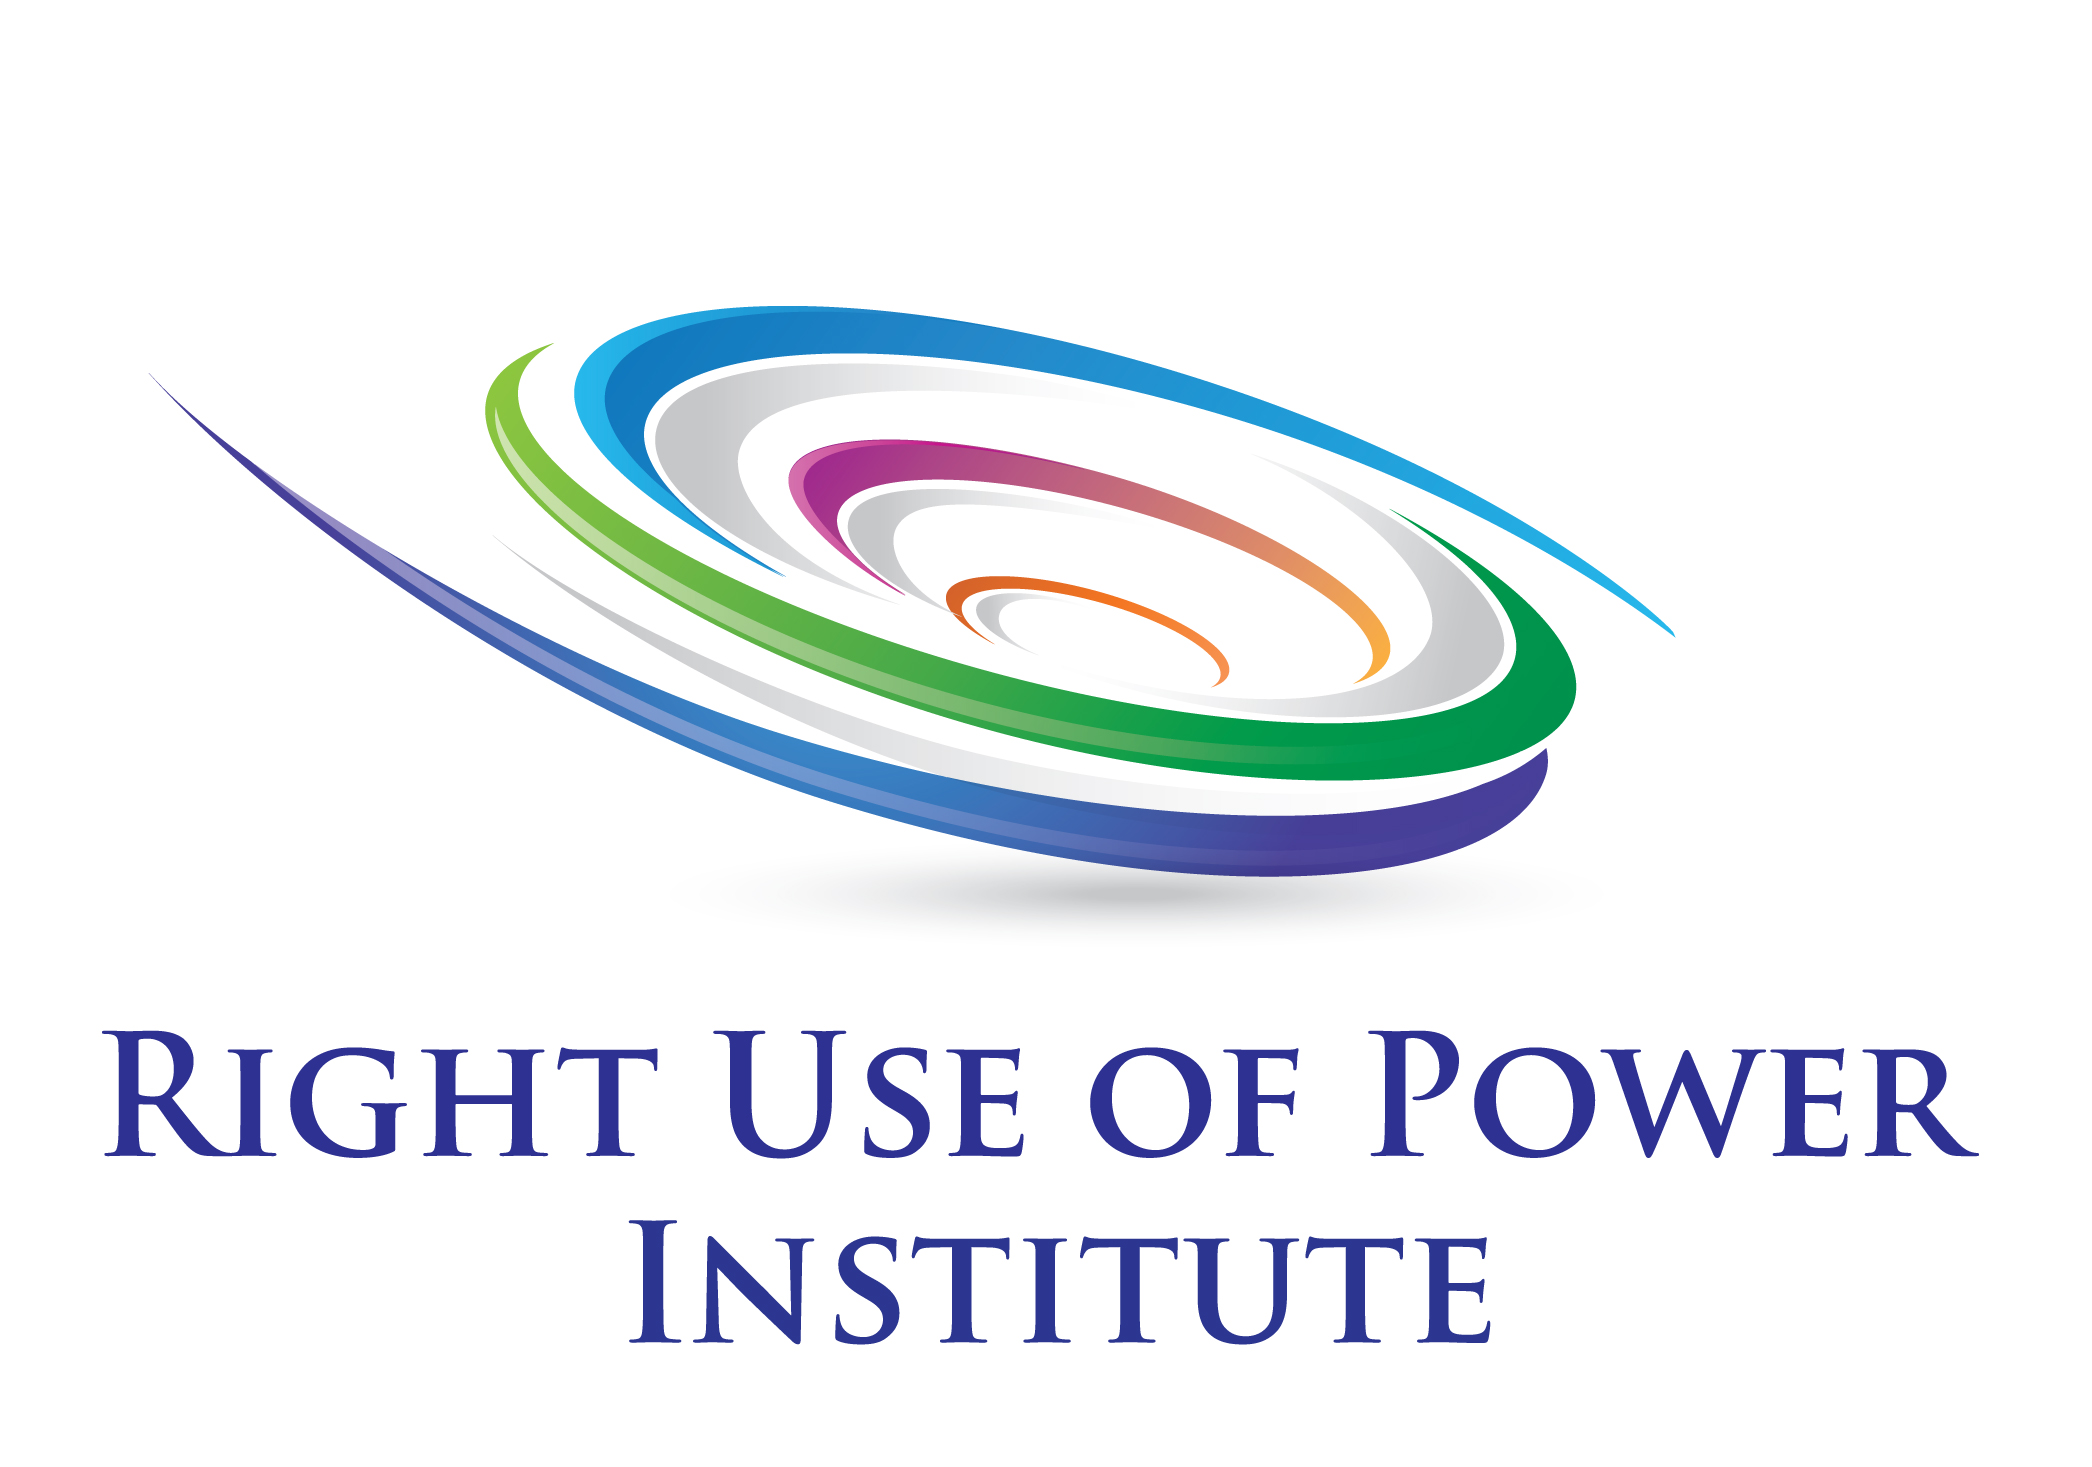 Right Use of Power Institute logo